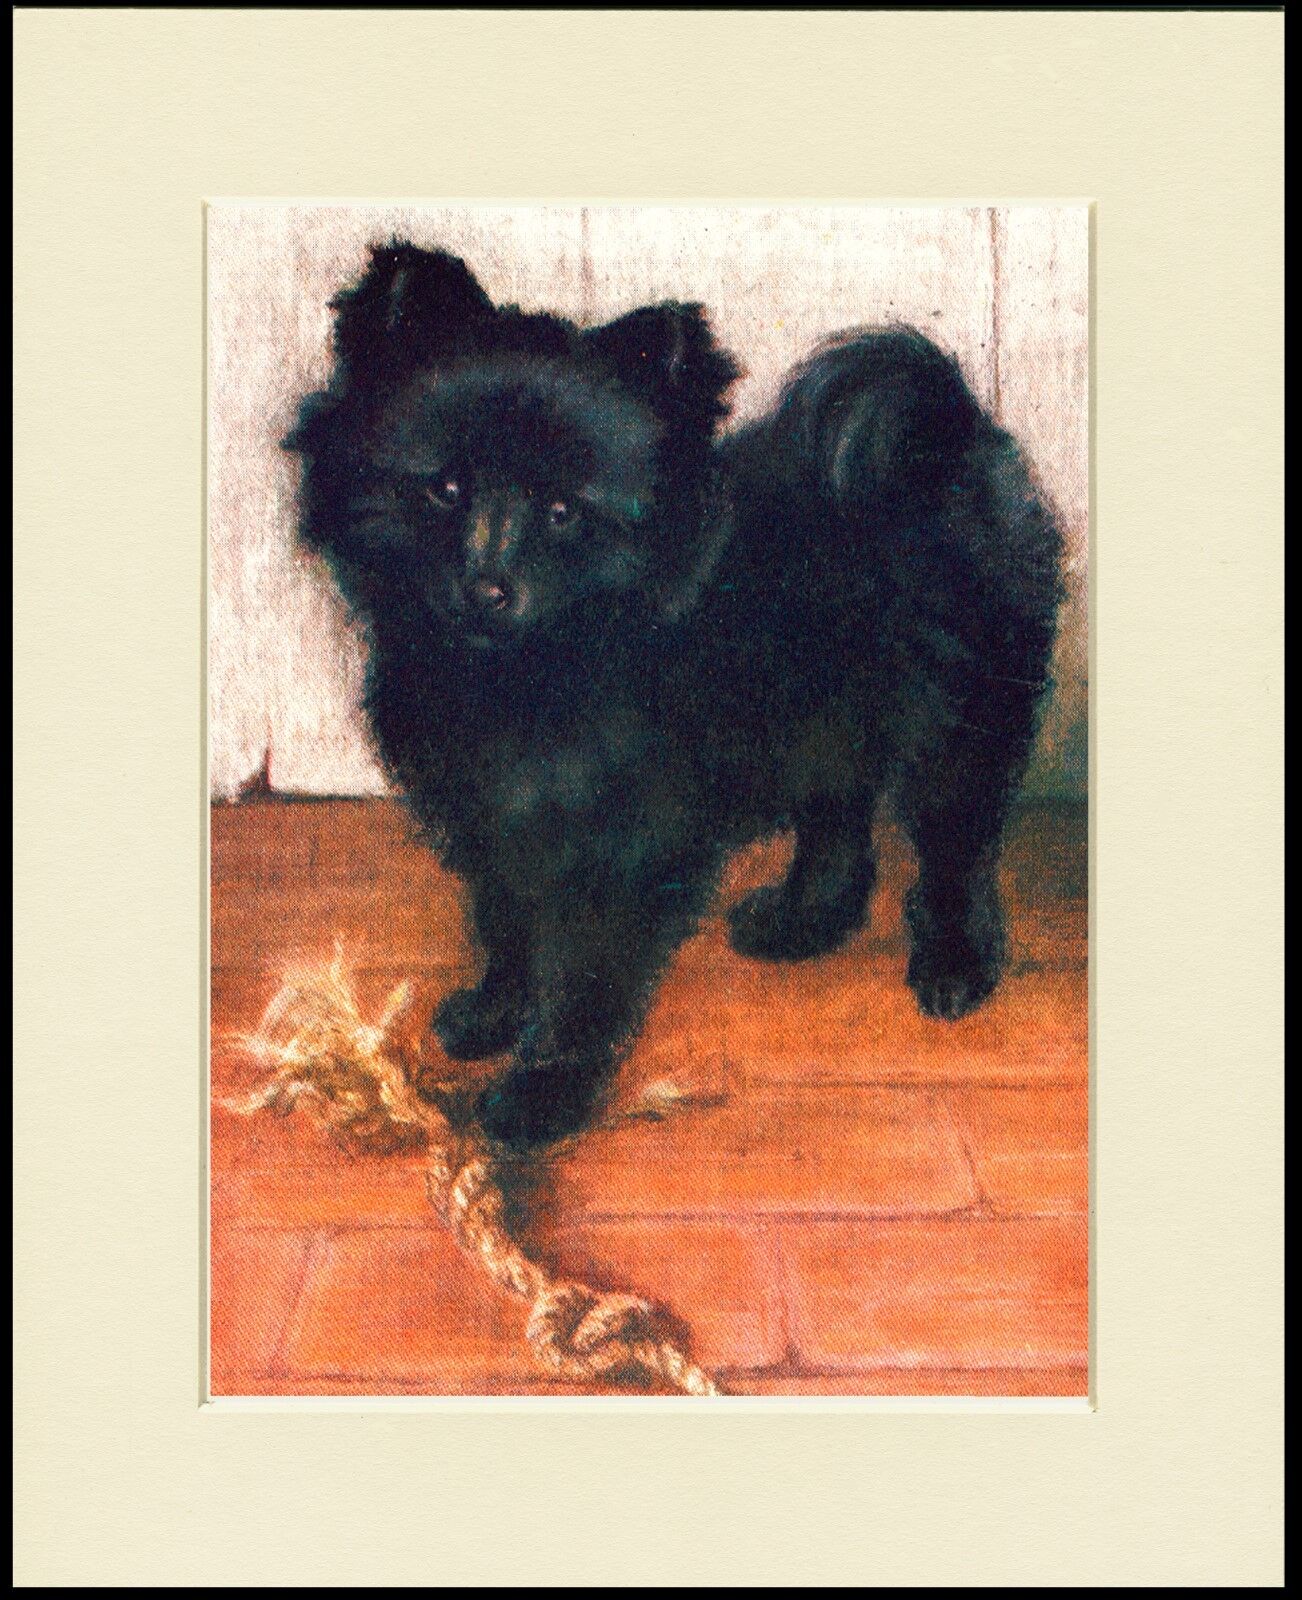 POMERANIAN PUPPY CHARMING LITTLE DOG PRINT MOUNTED READY TO FRAME